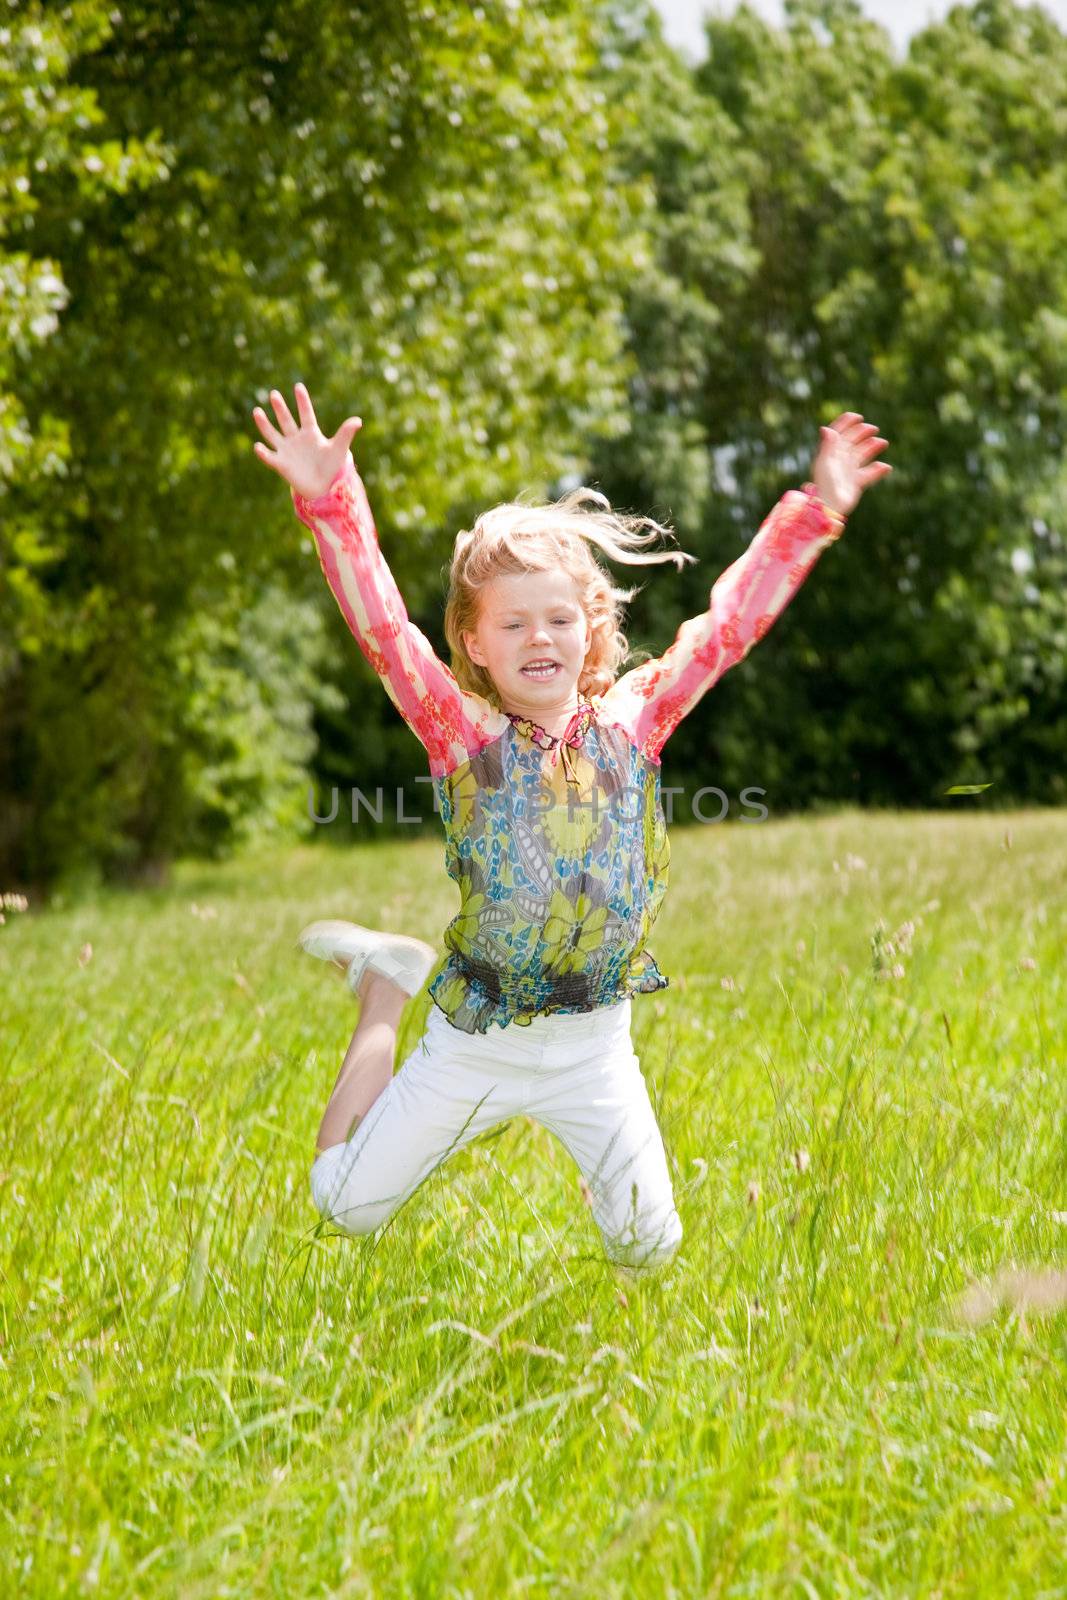 Child of 5 years old jumping high in the field arms outstretched